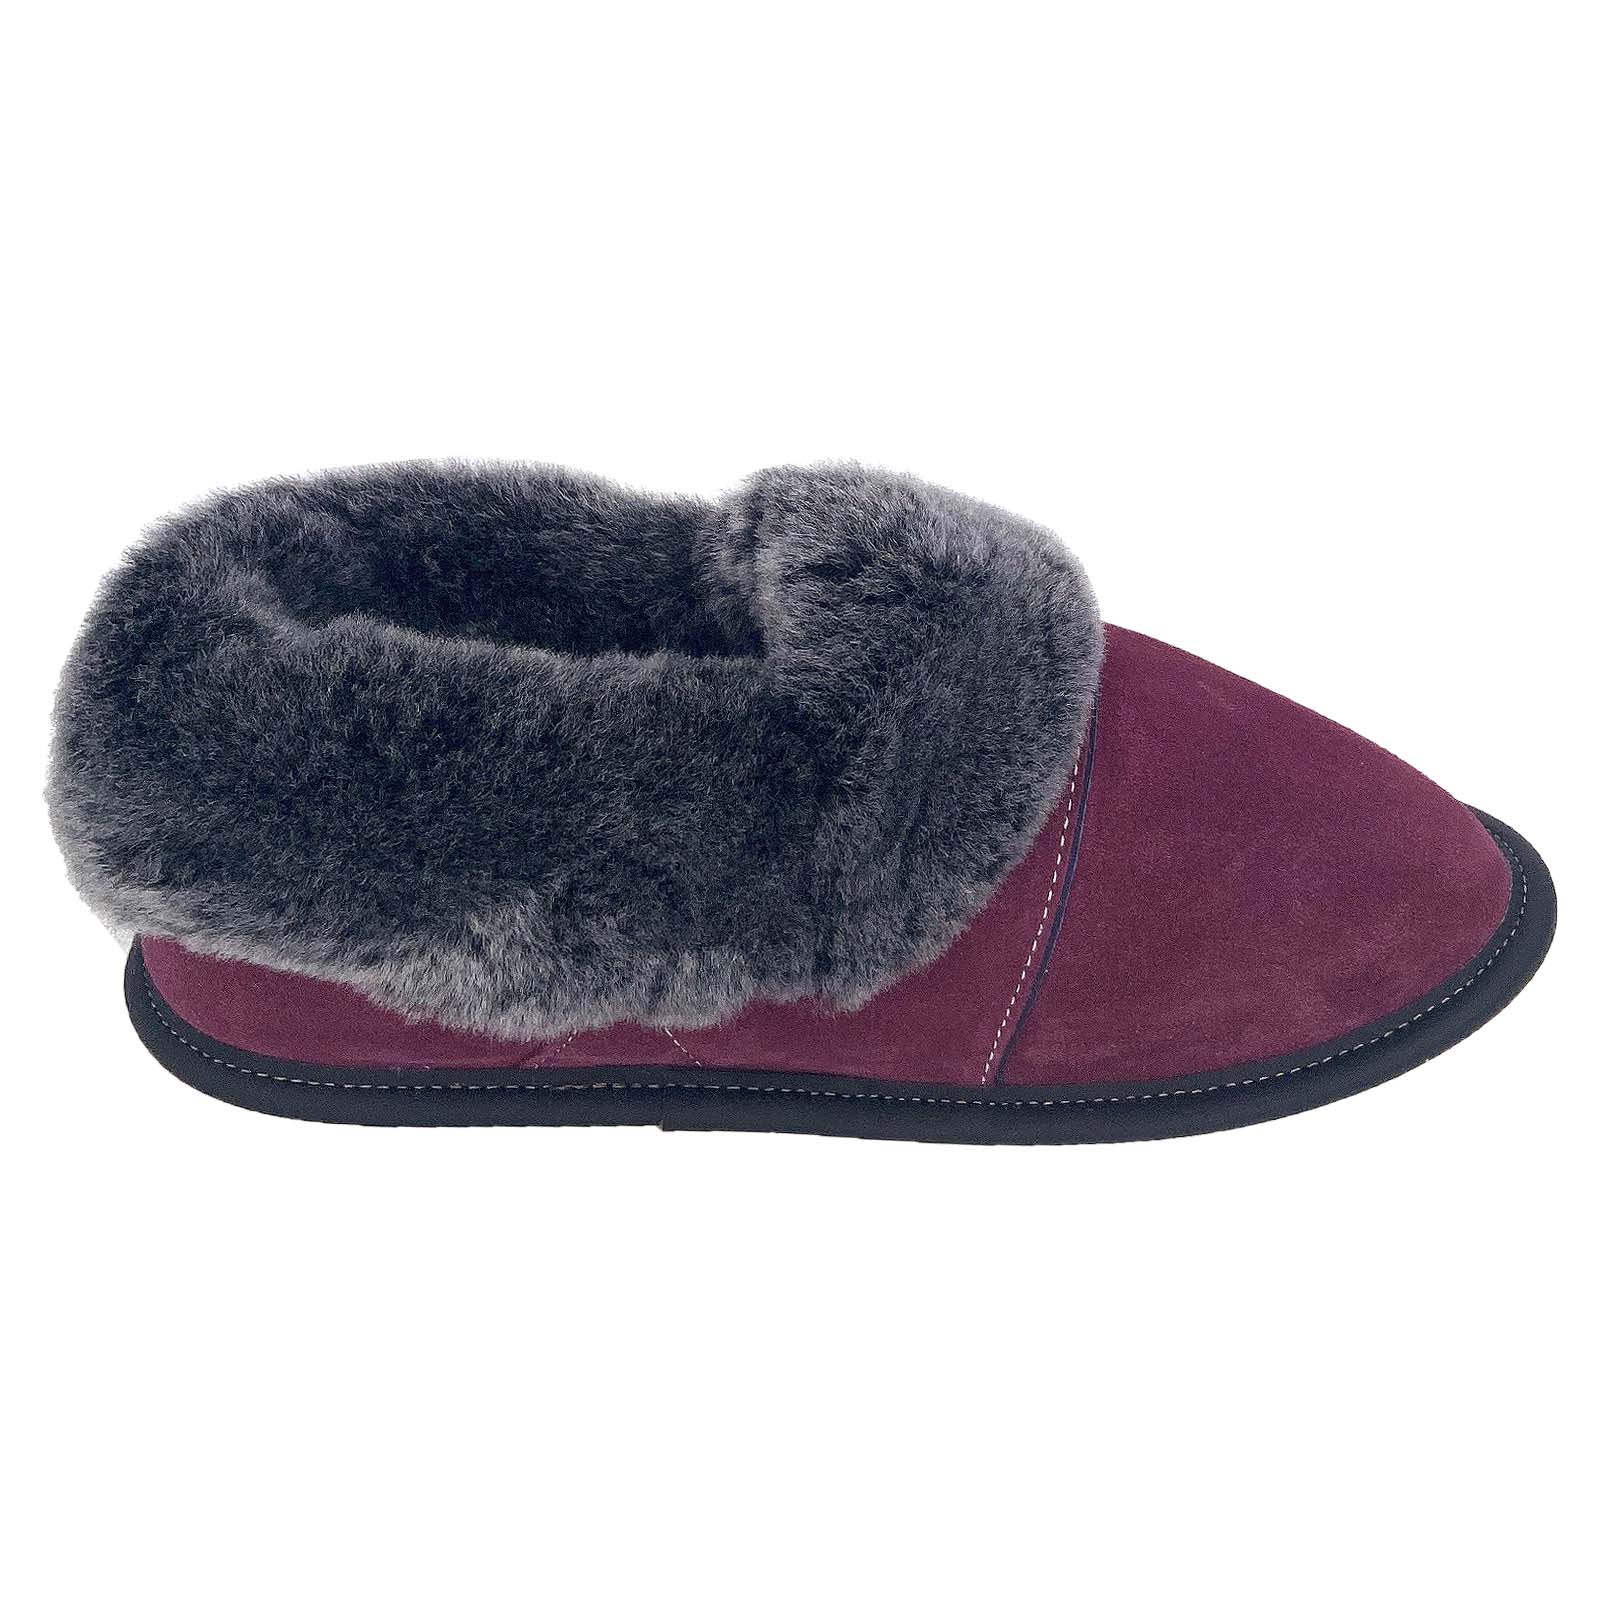 Women's Sheepskin Lazybone Slippers with EVA Soles (Final Clearance S ONLY)